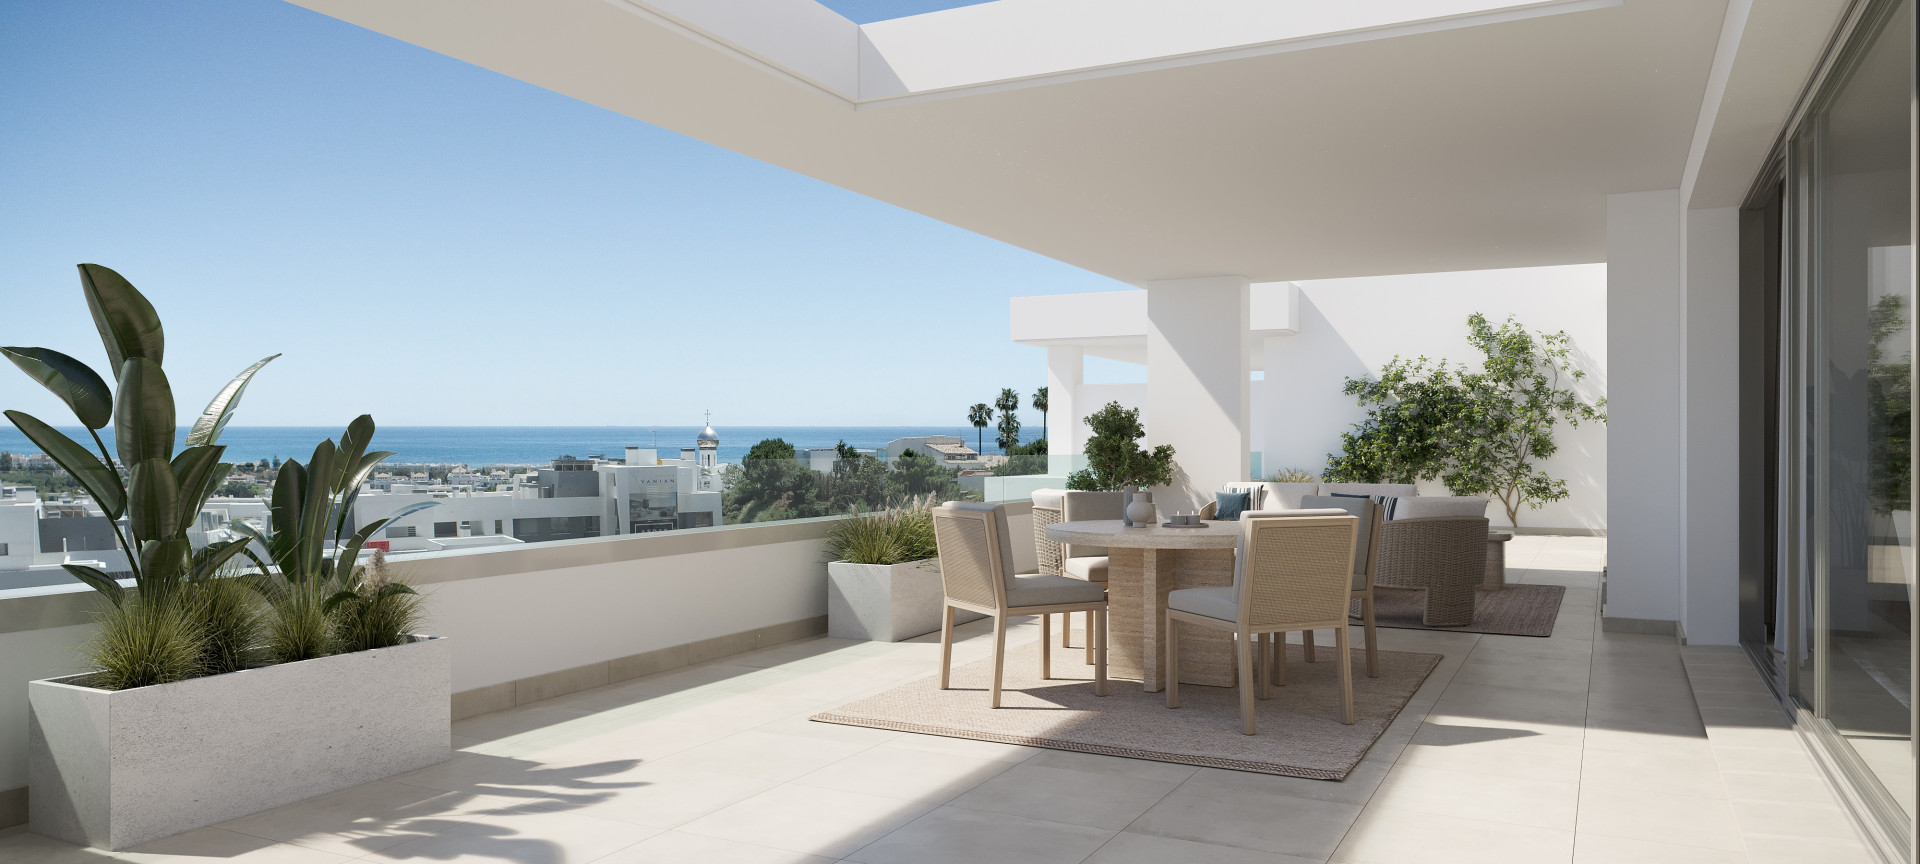 Brand new modern apartments and penthouses for sale on the New Golden Mile -  Estepona